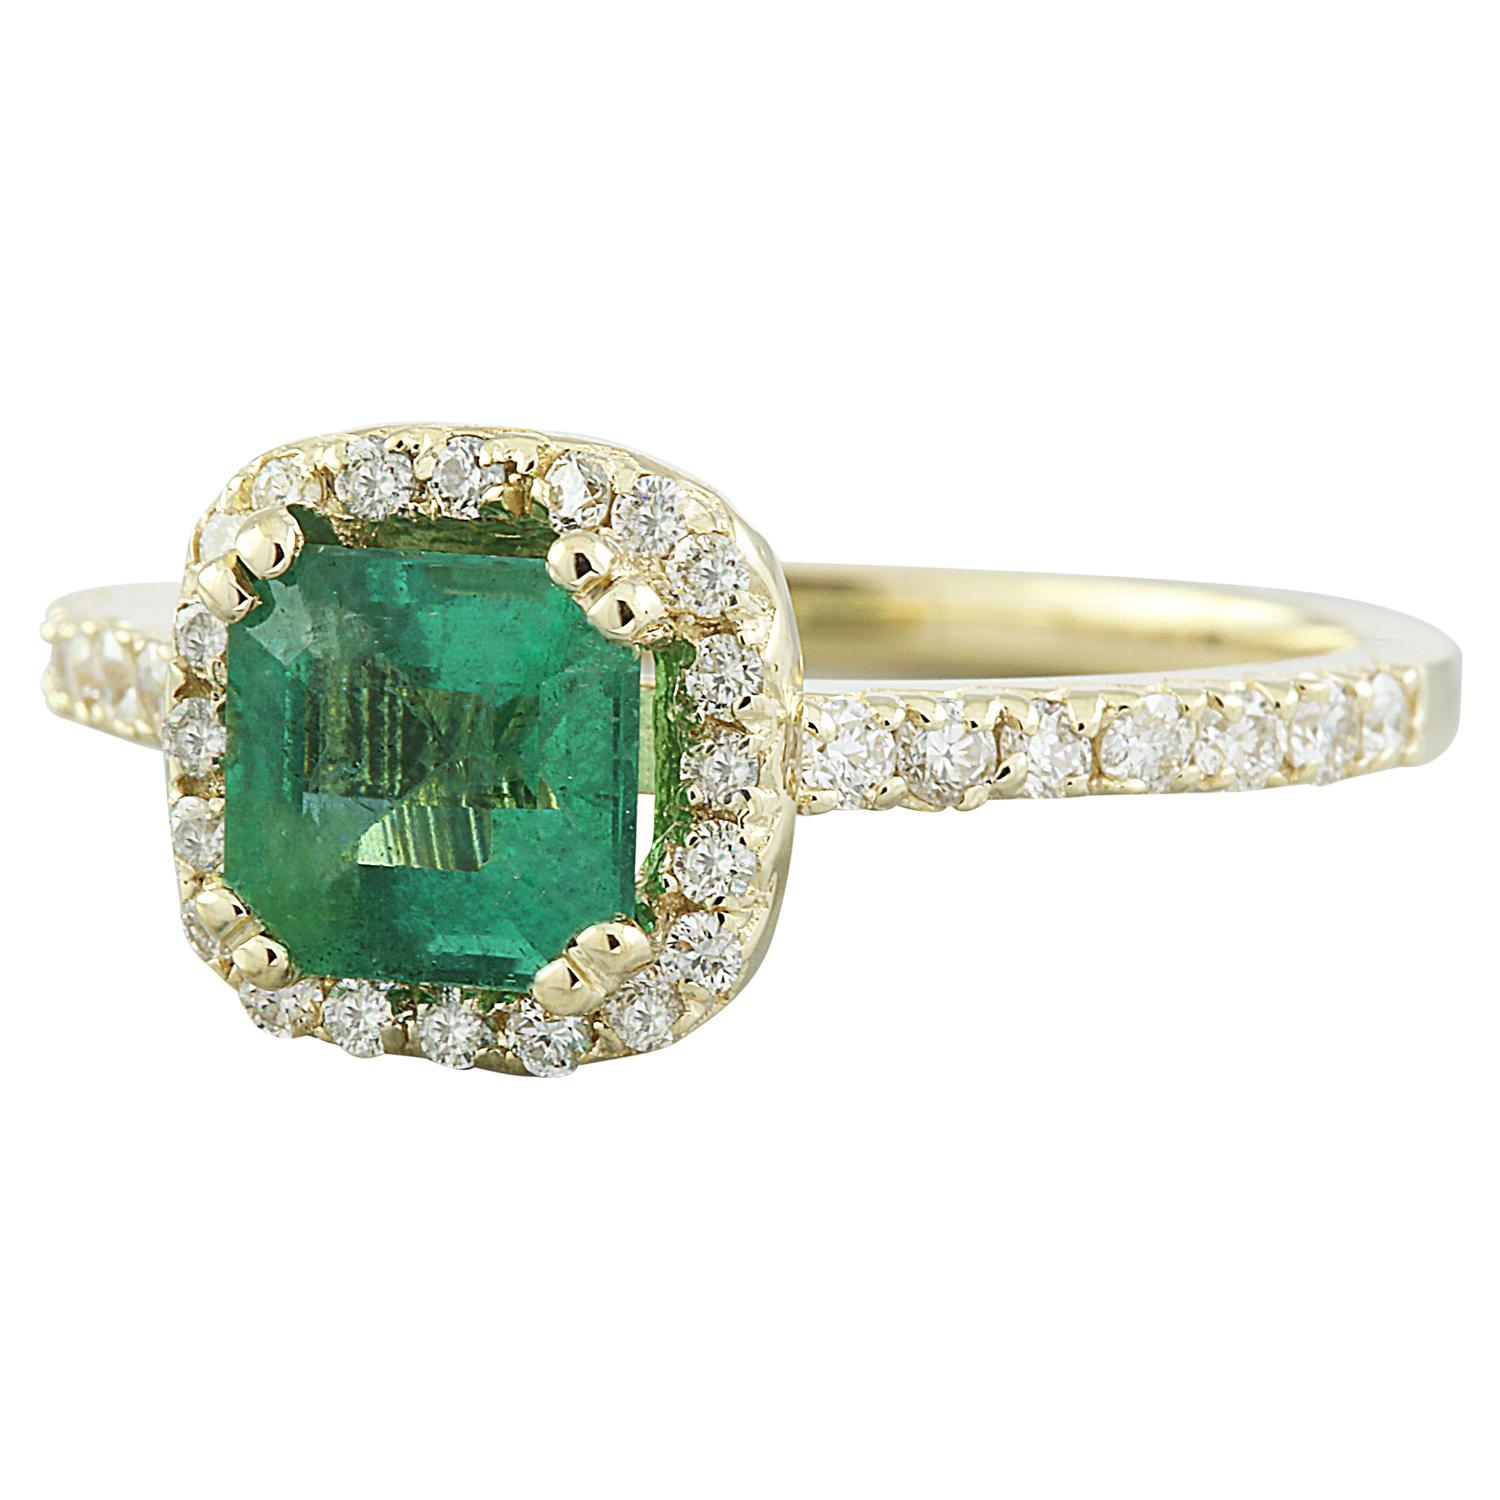 1.45 Carat Natural Emerald 14 Karat Solid Yellow Gold Diamond Ring
Stamped: 14K 
Total Ring Weight: 3 Grams 
Emerald Weight 1.04 Carat (6.00x6.00 Millimeters)
Diamond Weight: 0.41 carat (F-G Color, VS2-SI1 Clarity )
Face Measures: 9.10x9.50